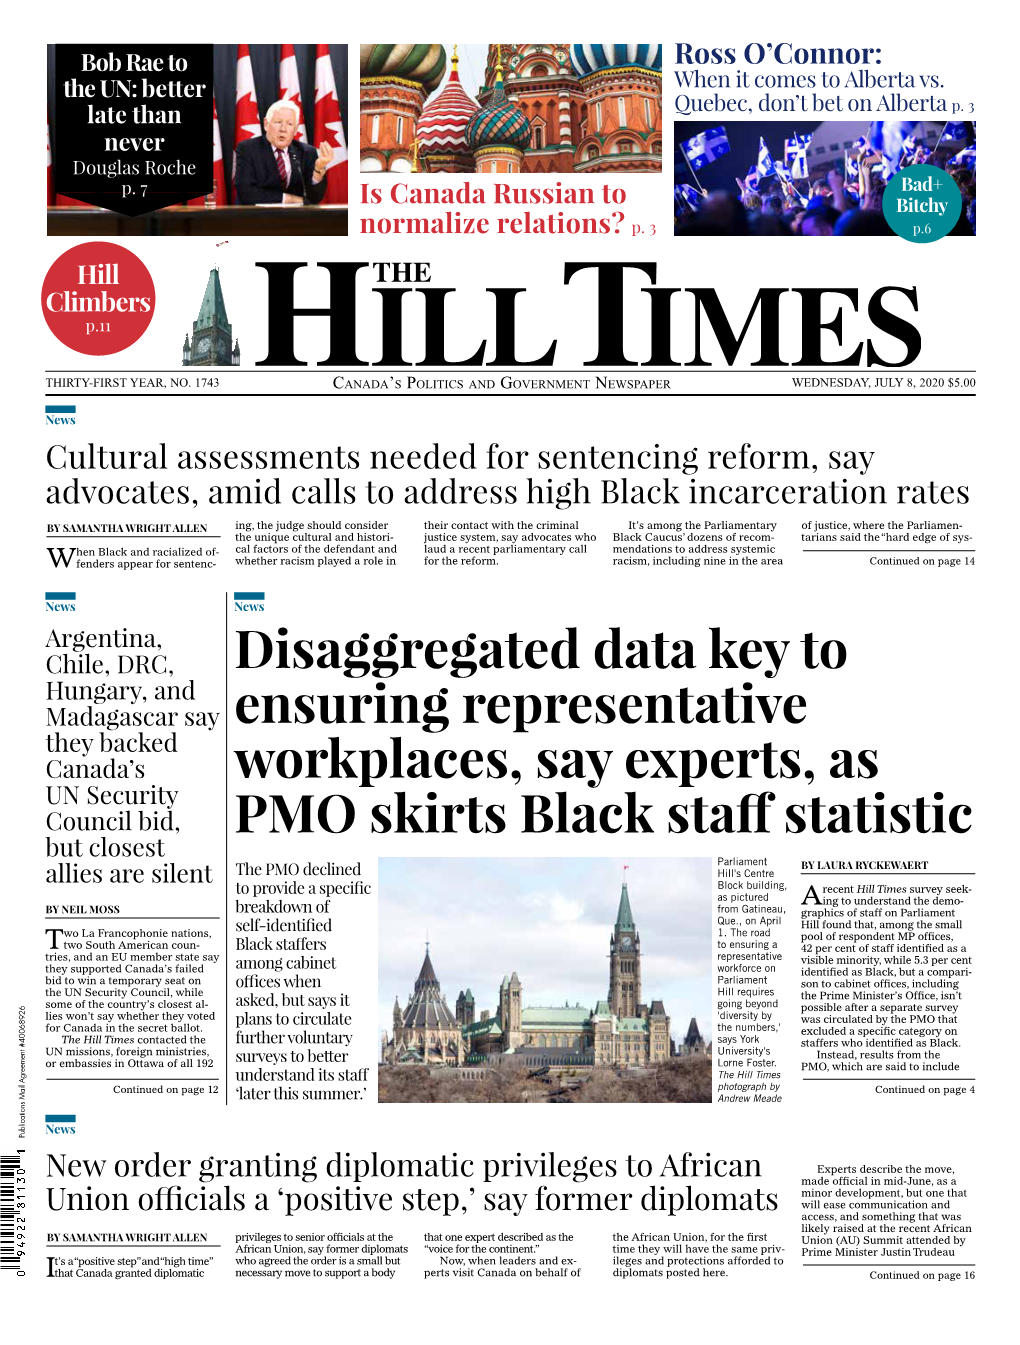 Disaggregated Data Key to Ensuring Representative Workplaces, Say Experts, As PMO Skirts Black Staff Statistic